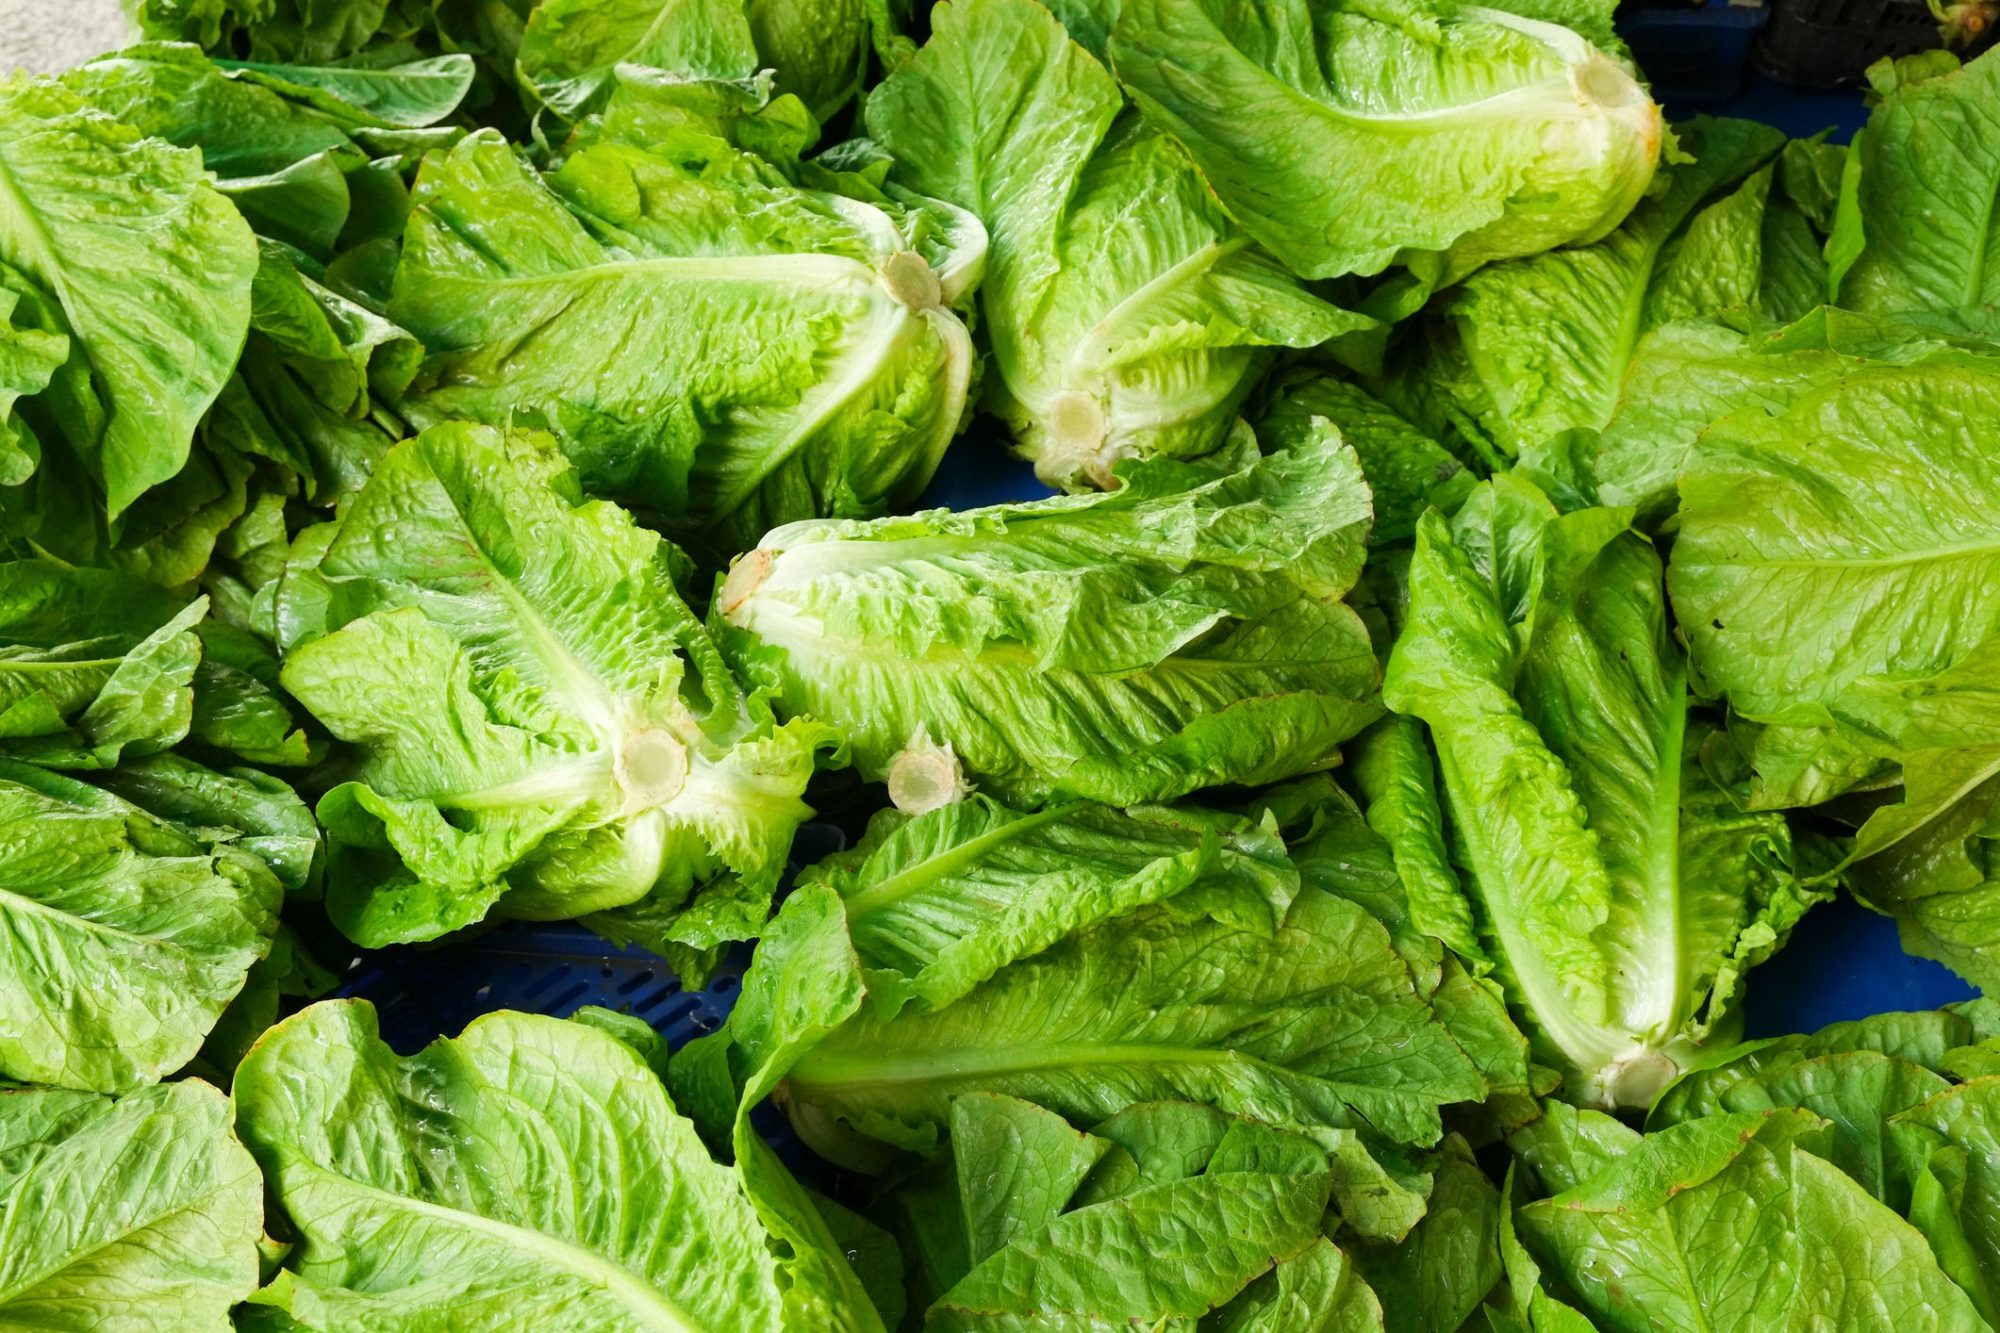 Produce of the Month: Romaine Lettuce